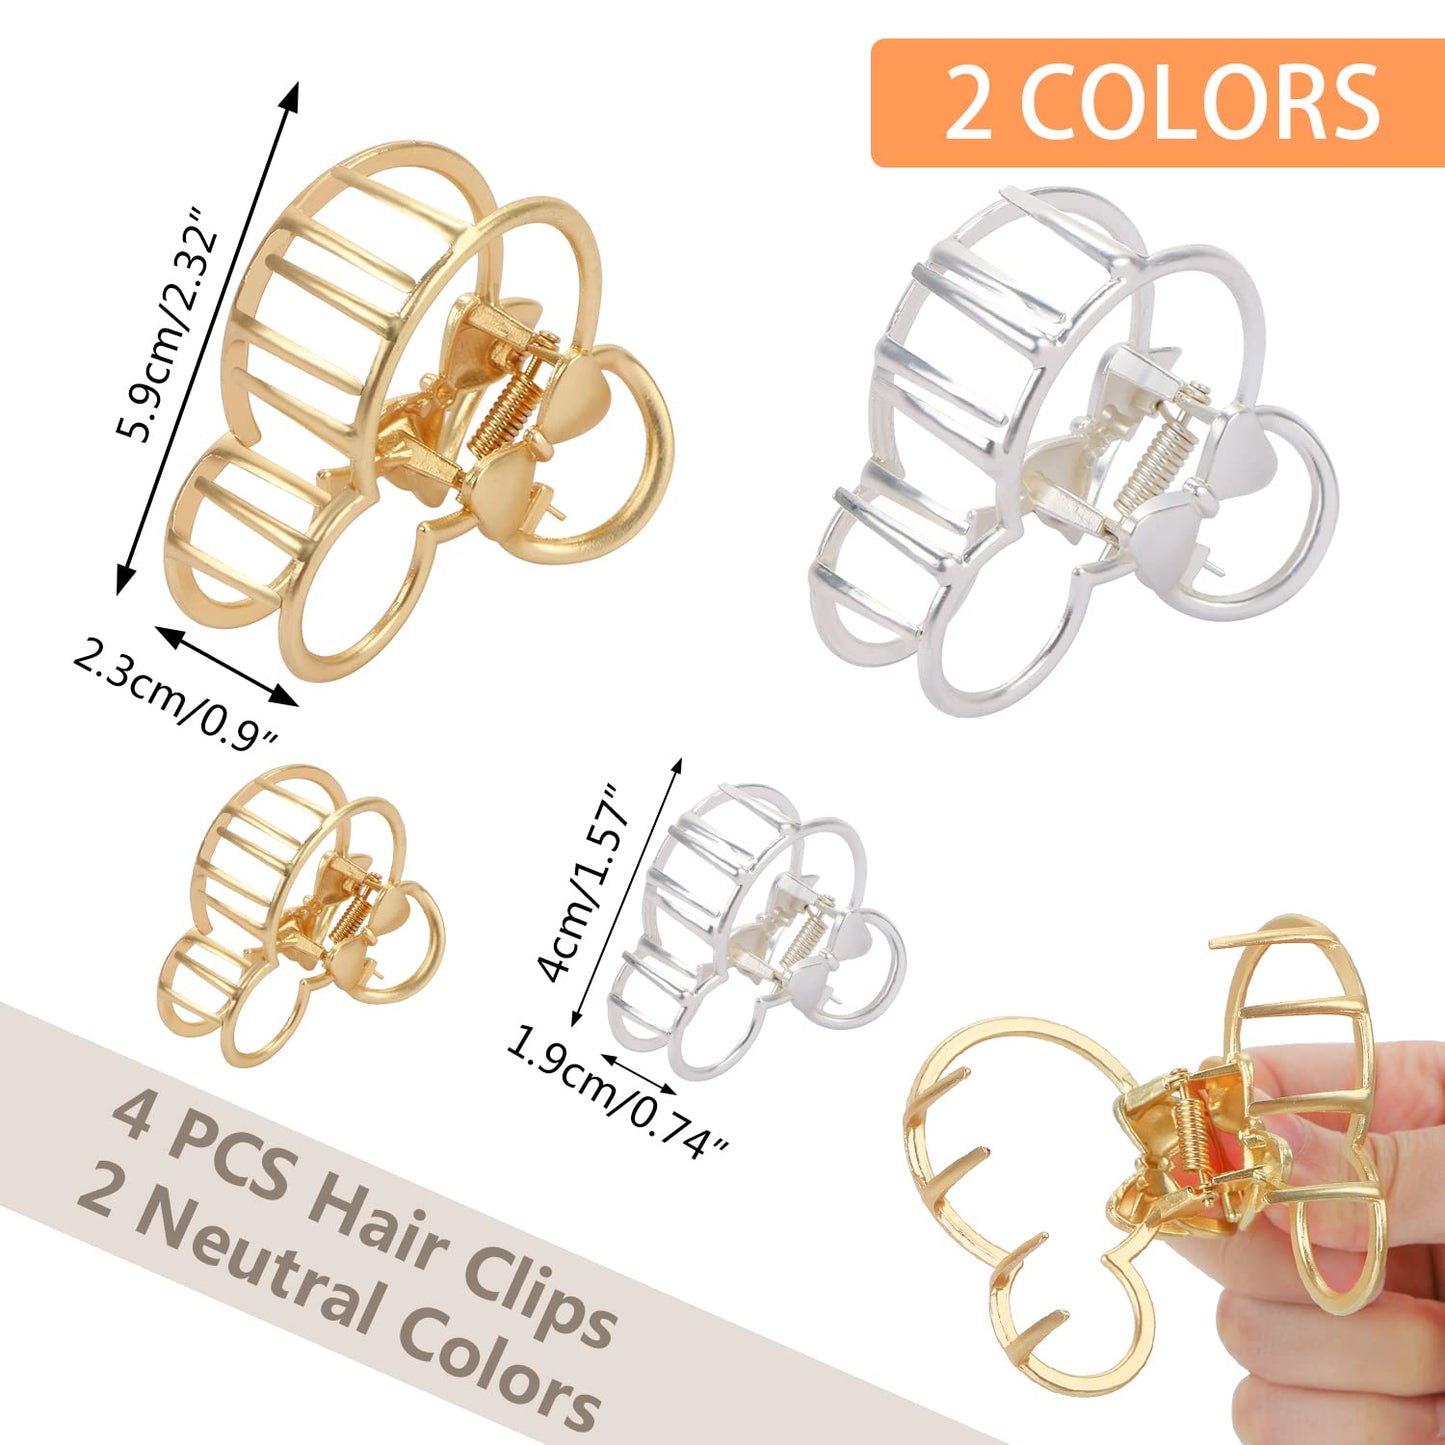 BENOSPACE 4Pcs Metal Hair Claw Clips Mouse Lady Large Gold Silver Hair Clips for Thick Heavy Hair Mouse Head Hollow Out Non-slip Hair Catch Barrette Jaw Clamp Women Fashion Hair Styling Accessories